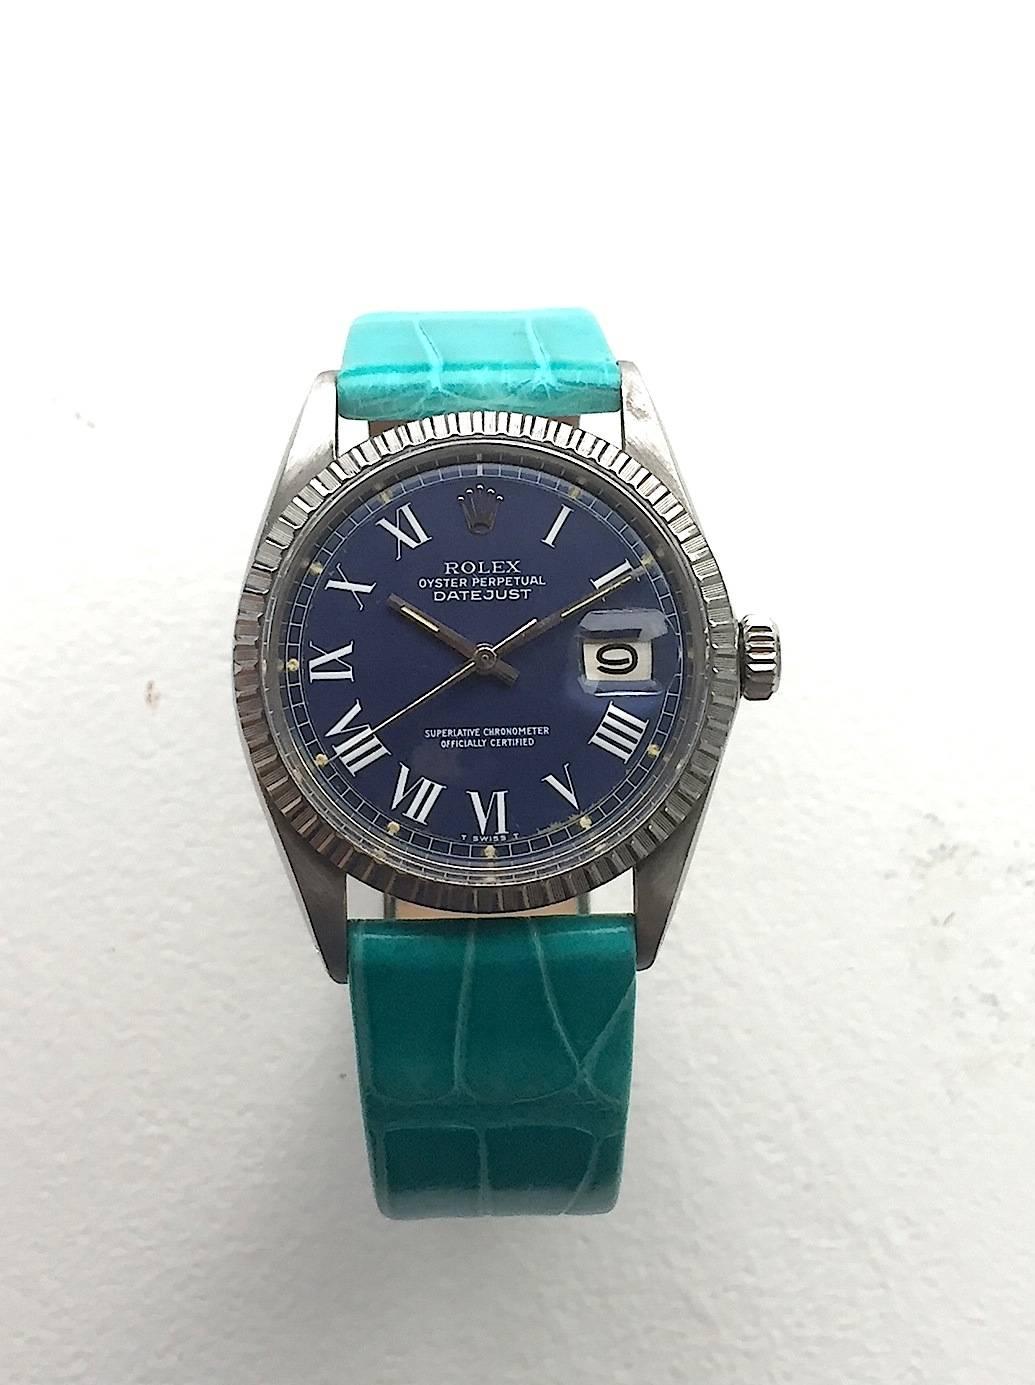 Rolex Stainless Steel Oyster Perpetual Datejust Watch
Factory Blue Buckley Dial with White Roman Numeral Hour Markers
Stainless Steel Engine-Turned Bezel
Stainless Steel Case
36mm in size 
Features Rolex Automatic Movement with Calibre 1570 with